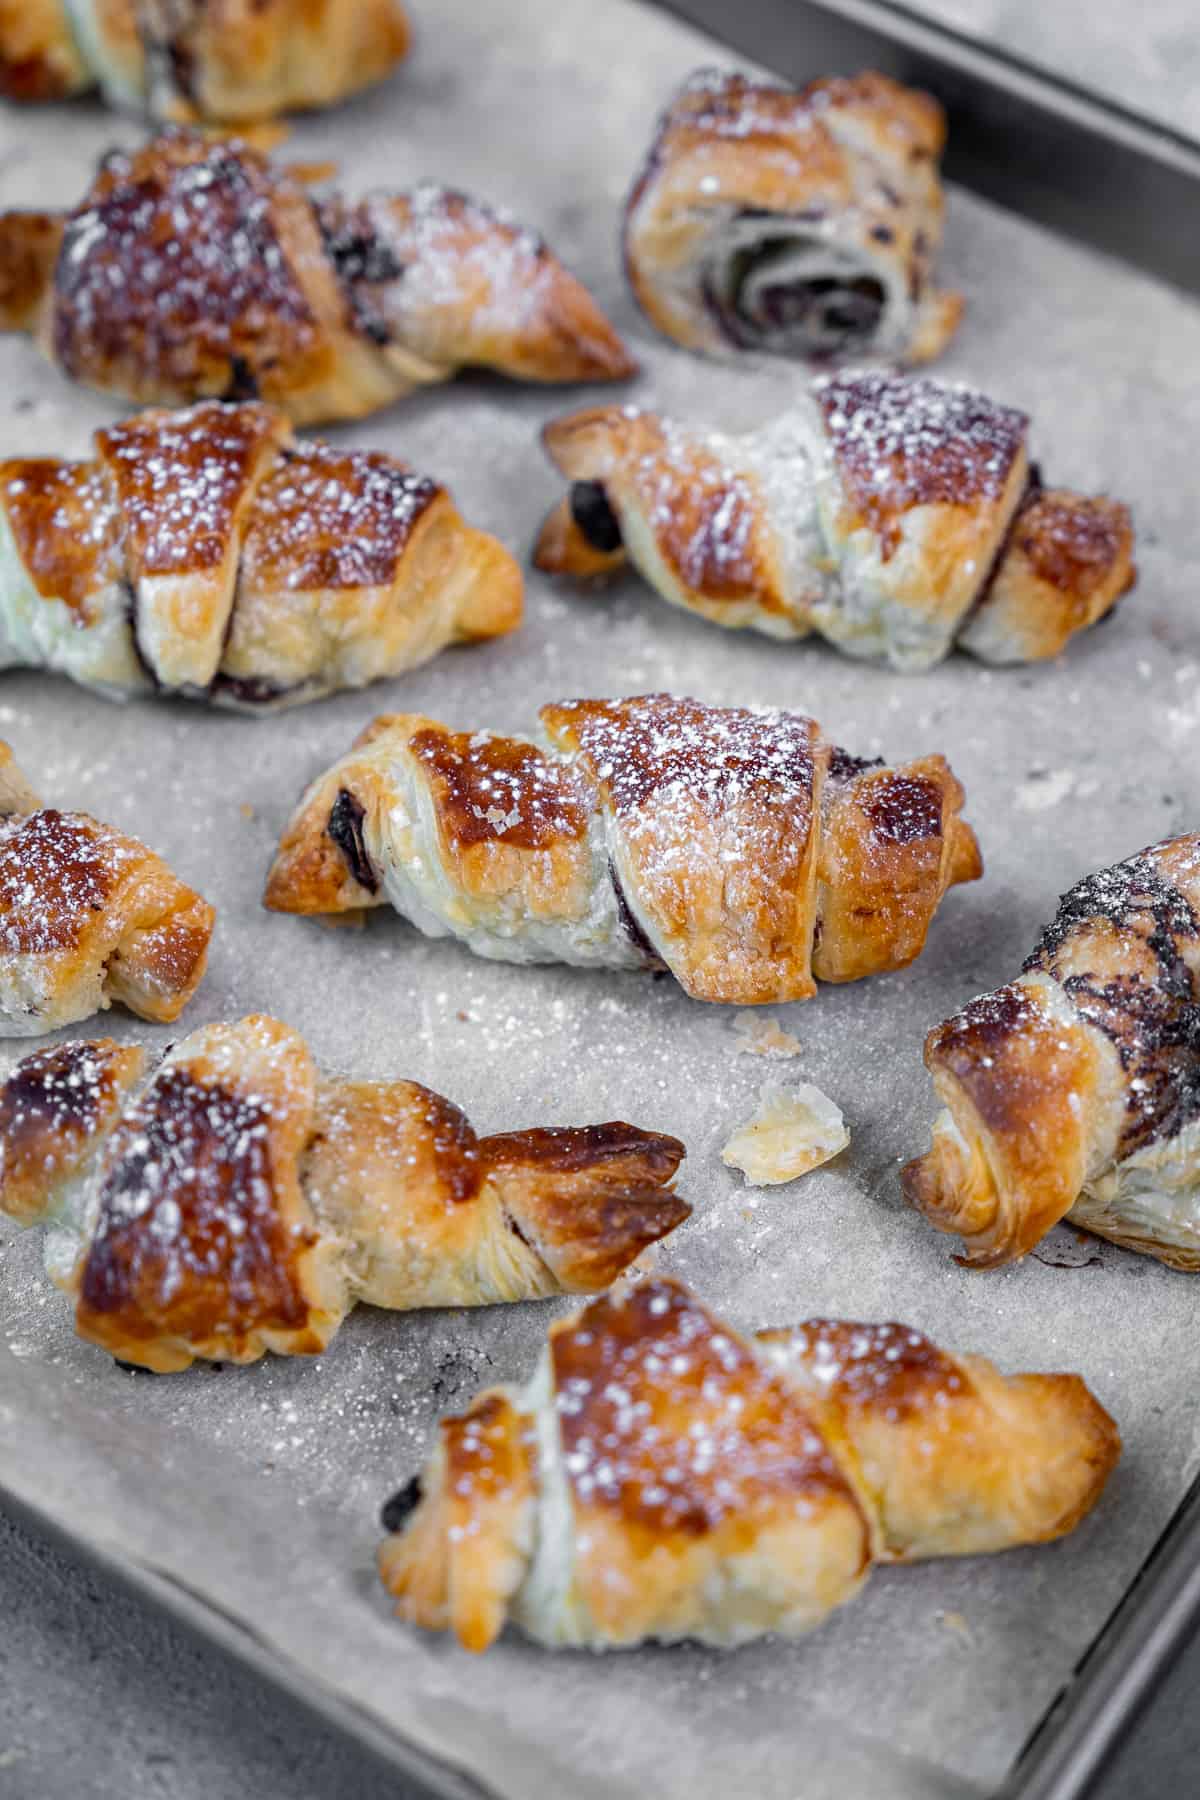 Puff pastries dusted with powdered sugar on a baking sheet.